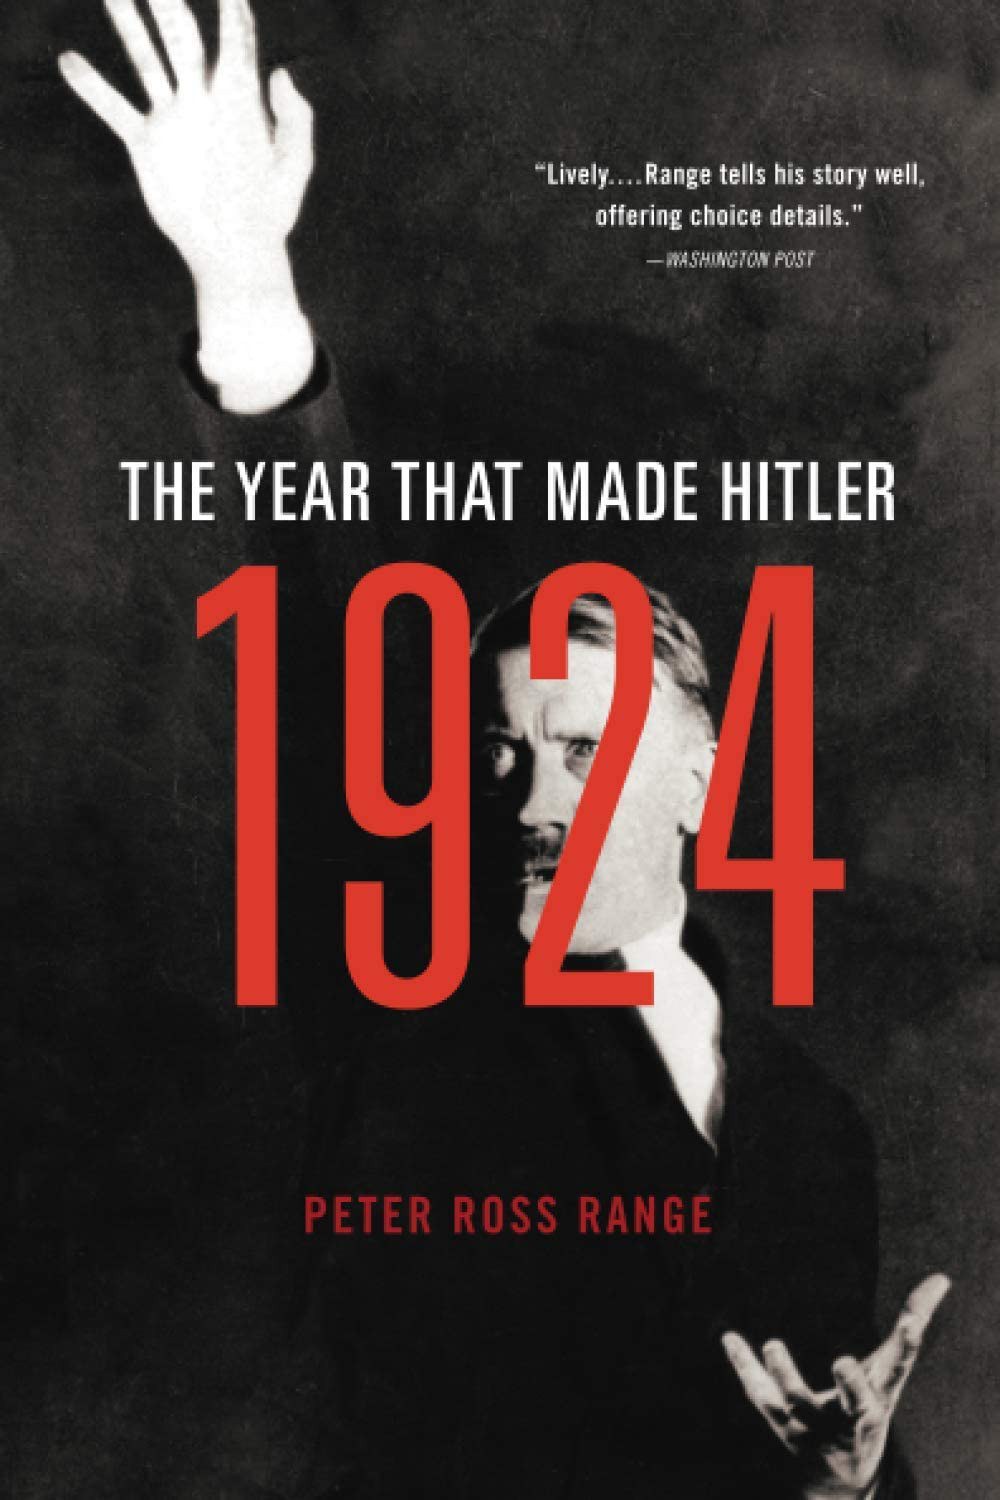 1924 : the year that made Hitler /